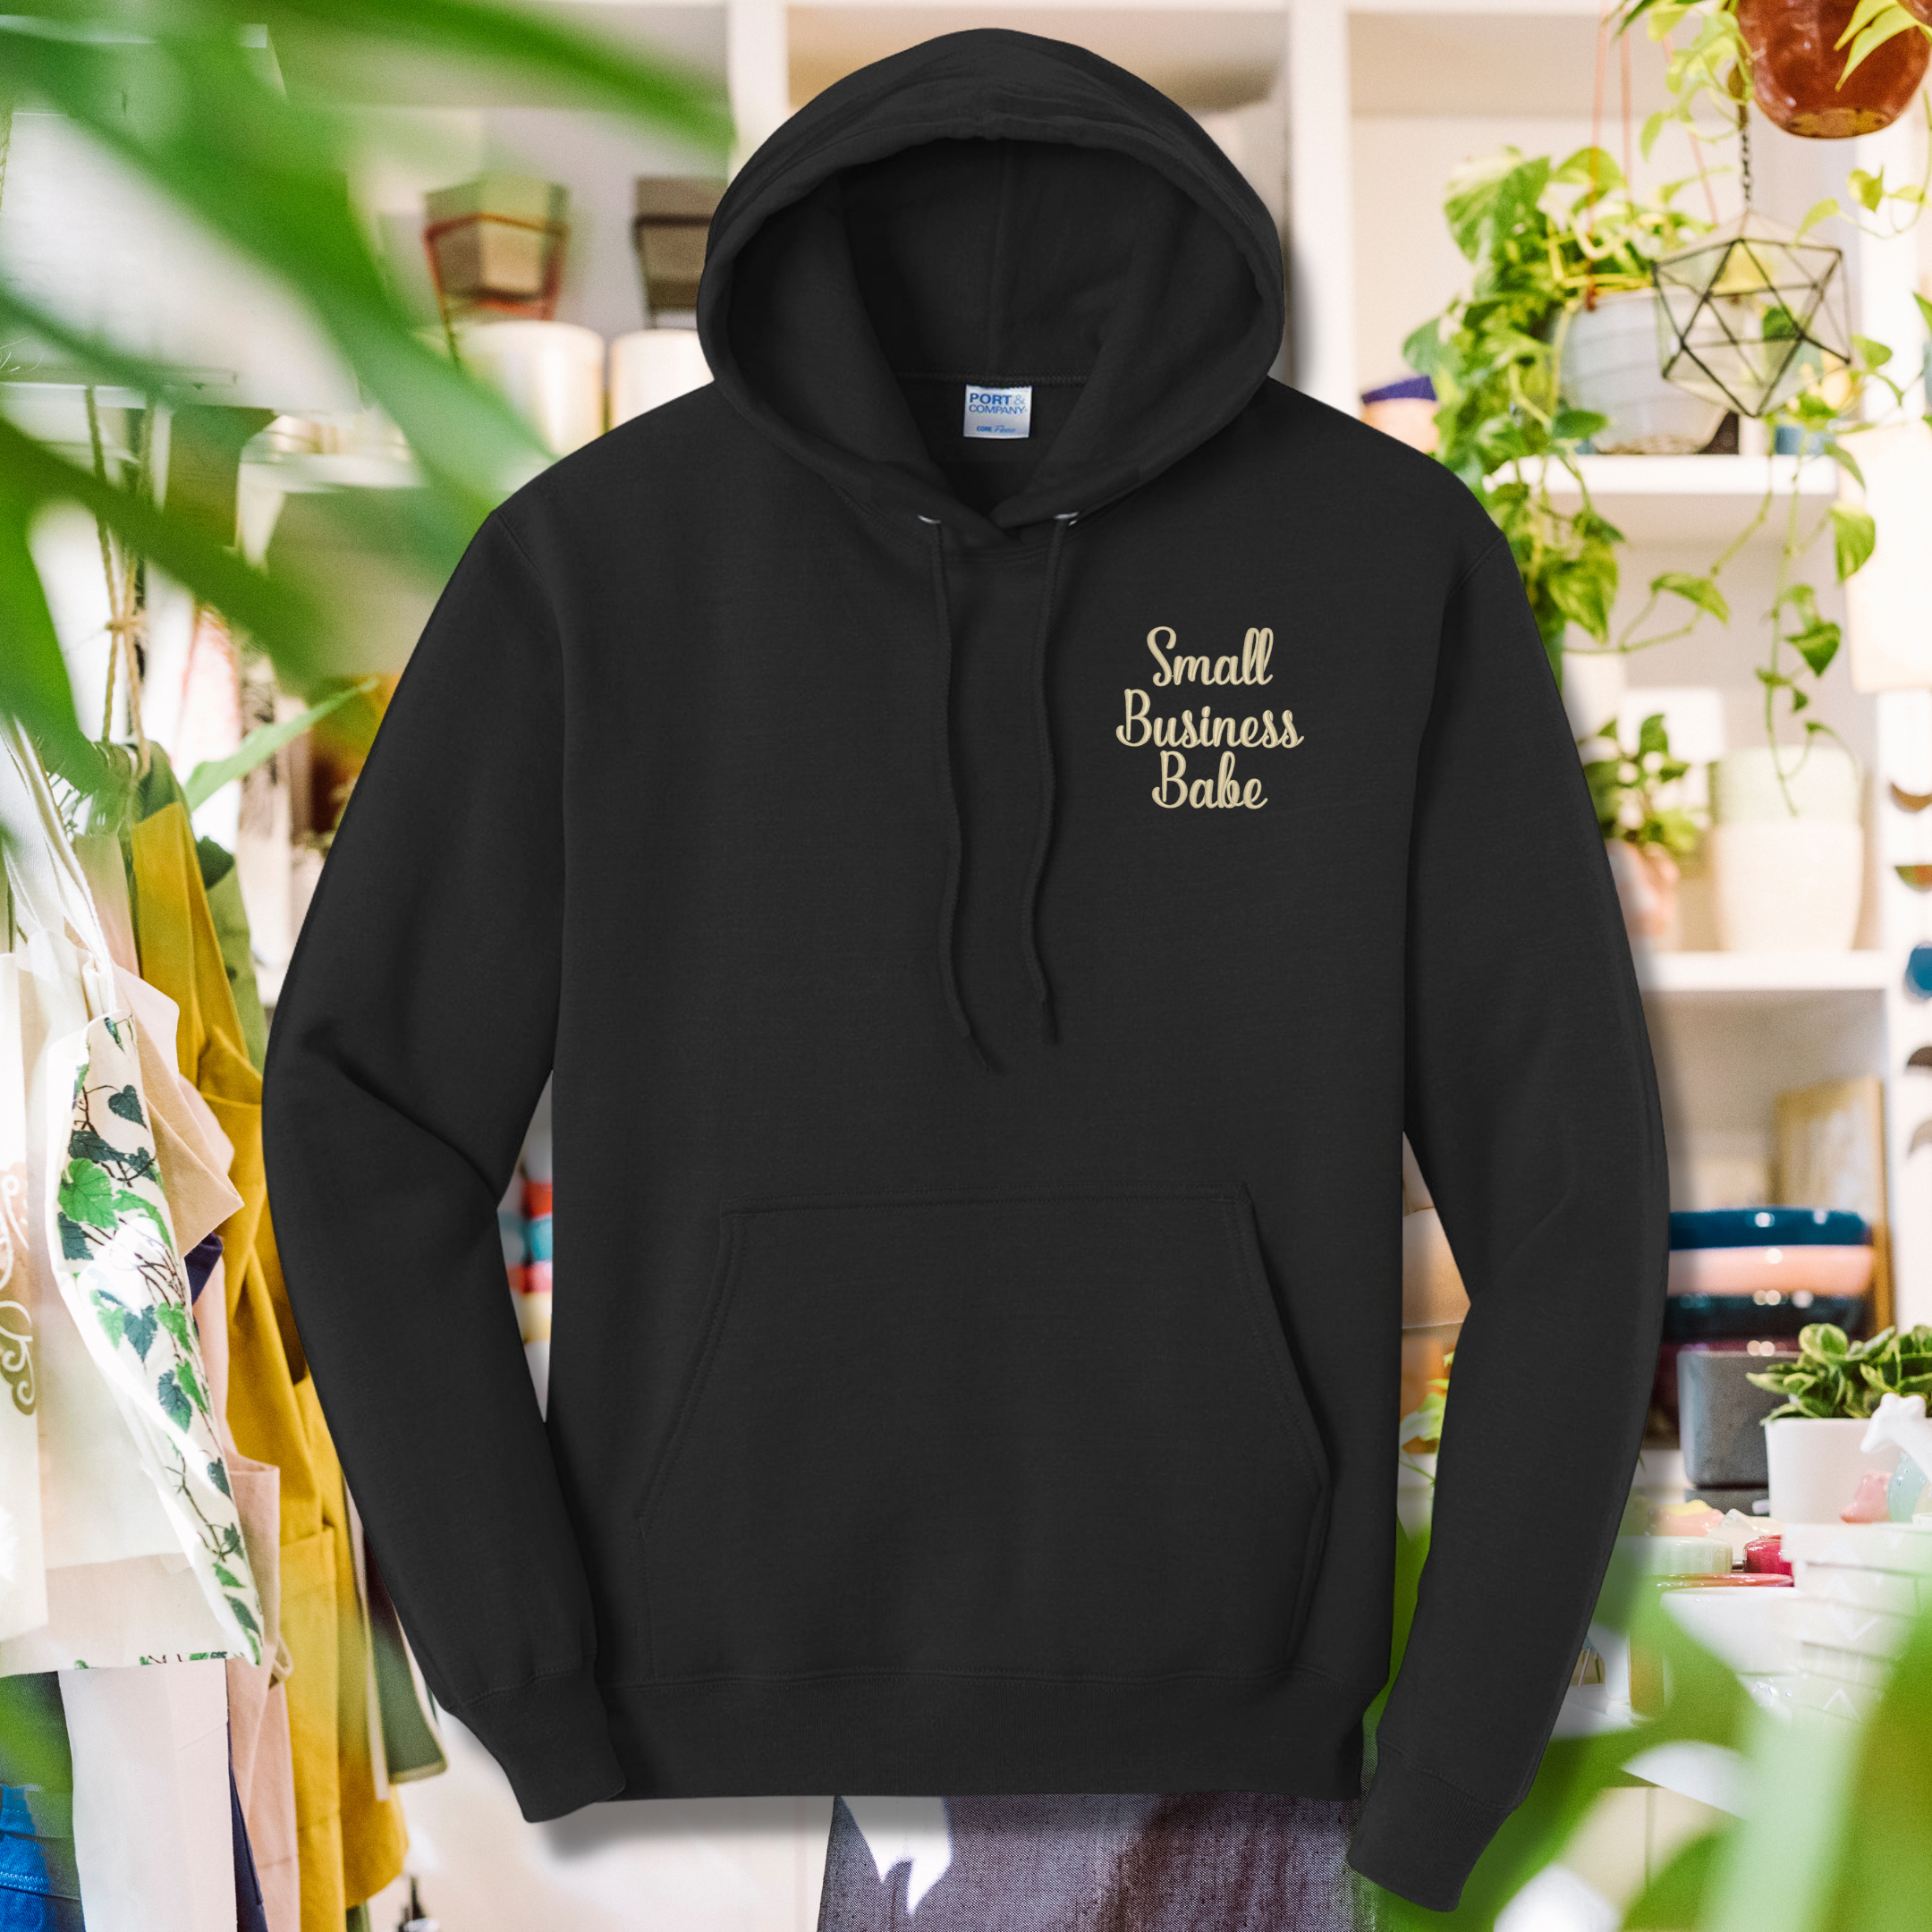 Small Business Babe Embroidered Black Hoodie, Unisex